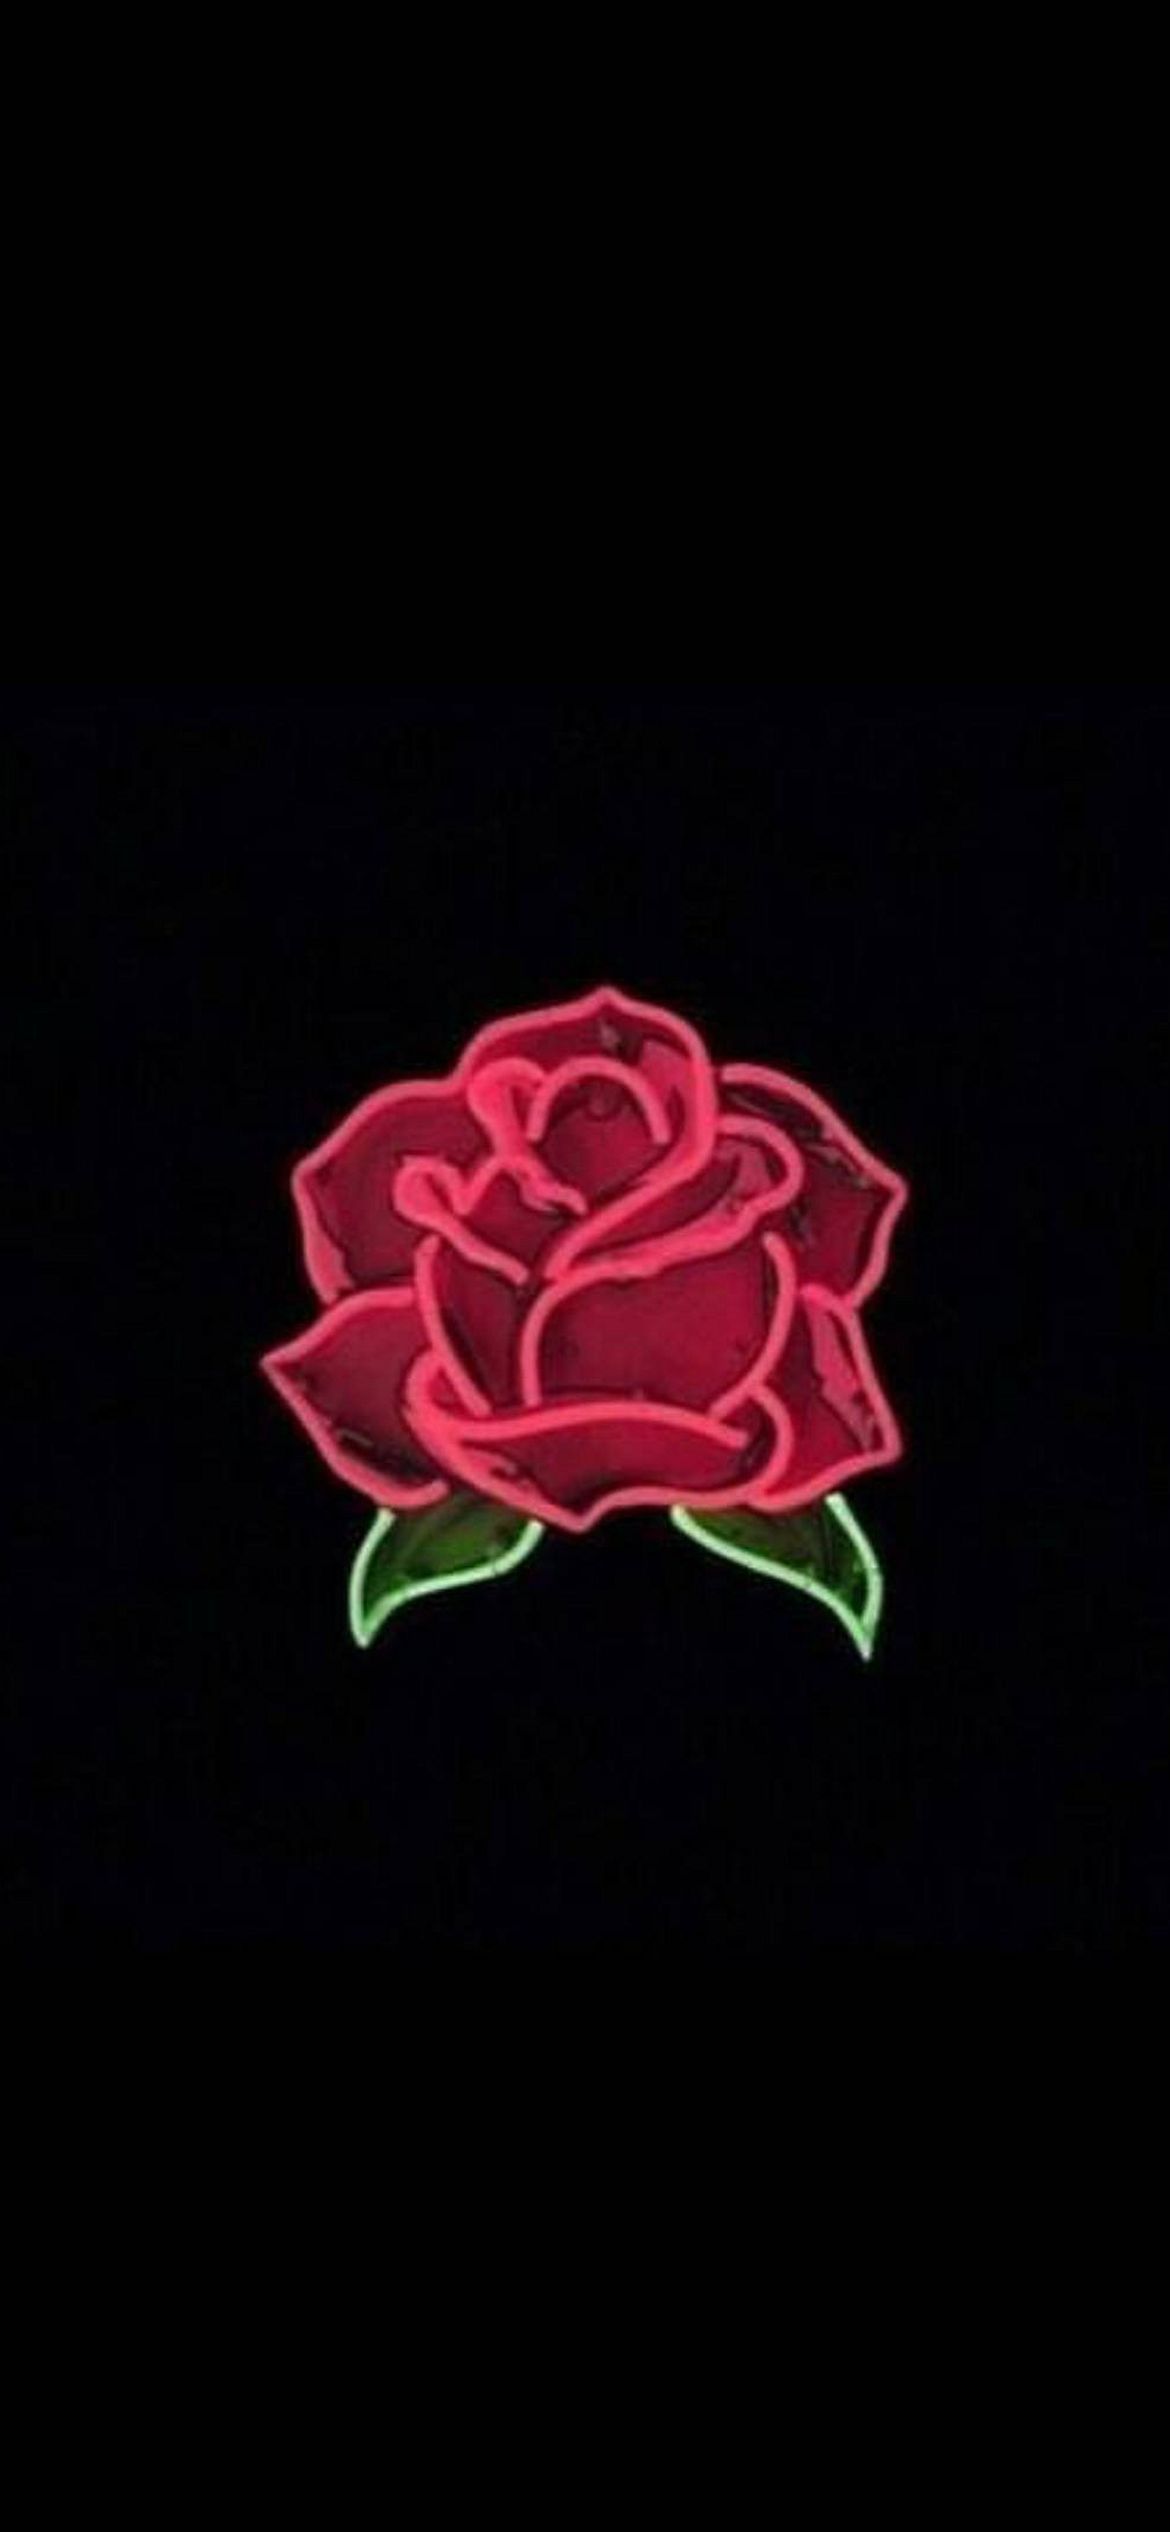 The rose from beauty and beast in a dark room - 